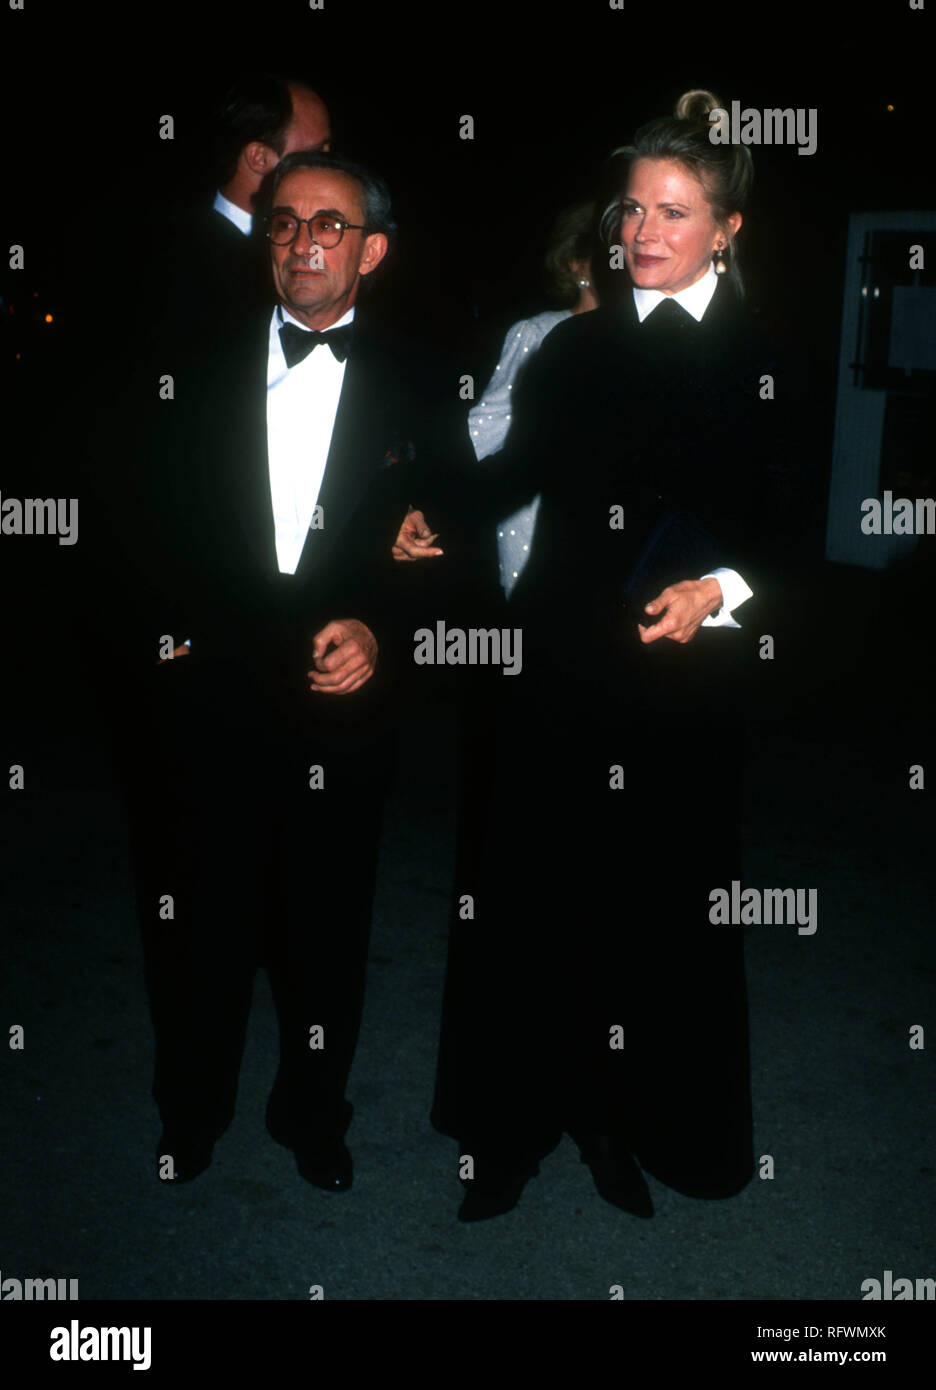 HOLLYWOOD, CA - NOVEMBER 13: Director Louis Malle, and wife actress Candice Bergen attend the Hollywood Entertainment Museum's Fifth Annual Legacy Awards on November 13, 1993 at the Hollywood Palladium in Hollywood, California. Photo by Barry King/Alamy Stock Photo Stock Photo